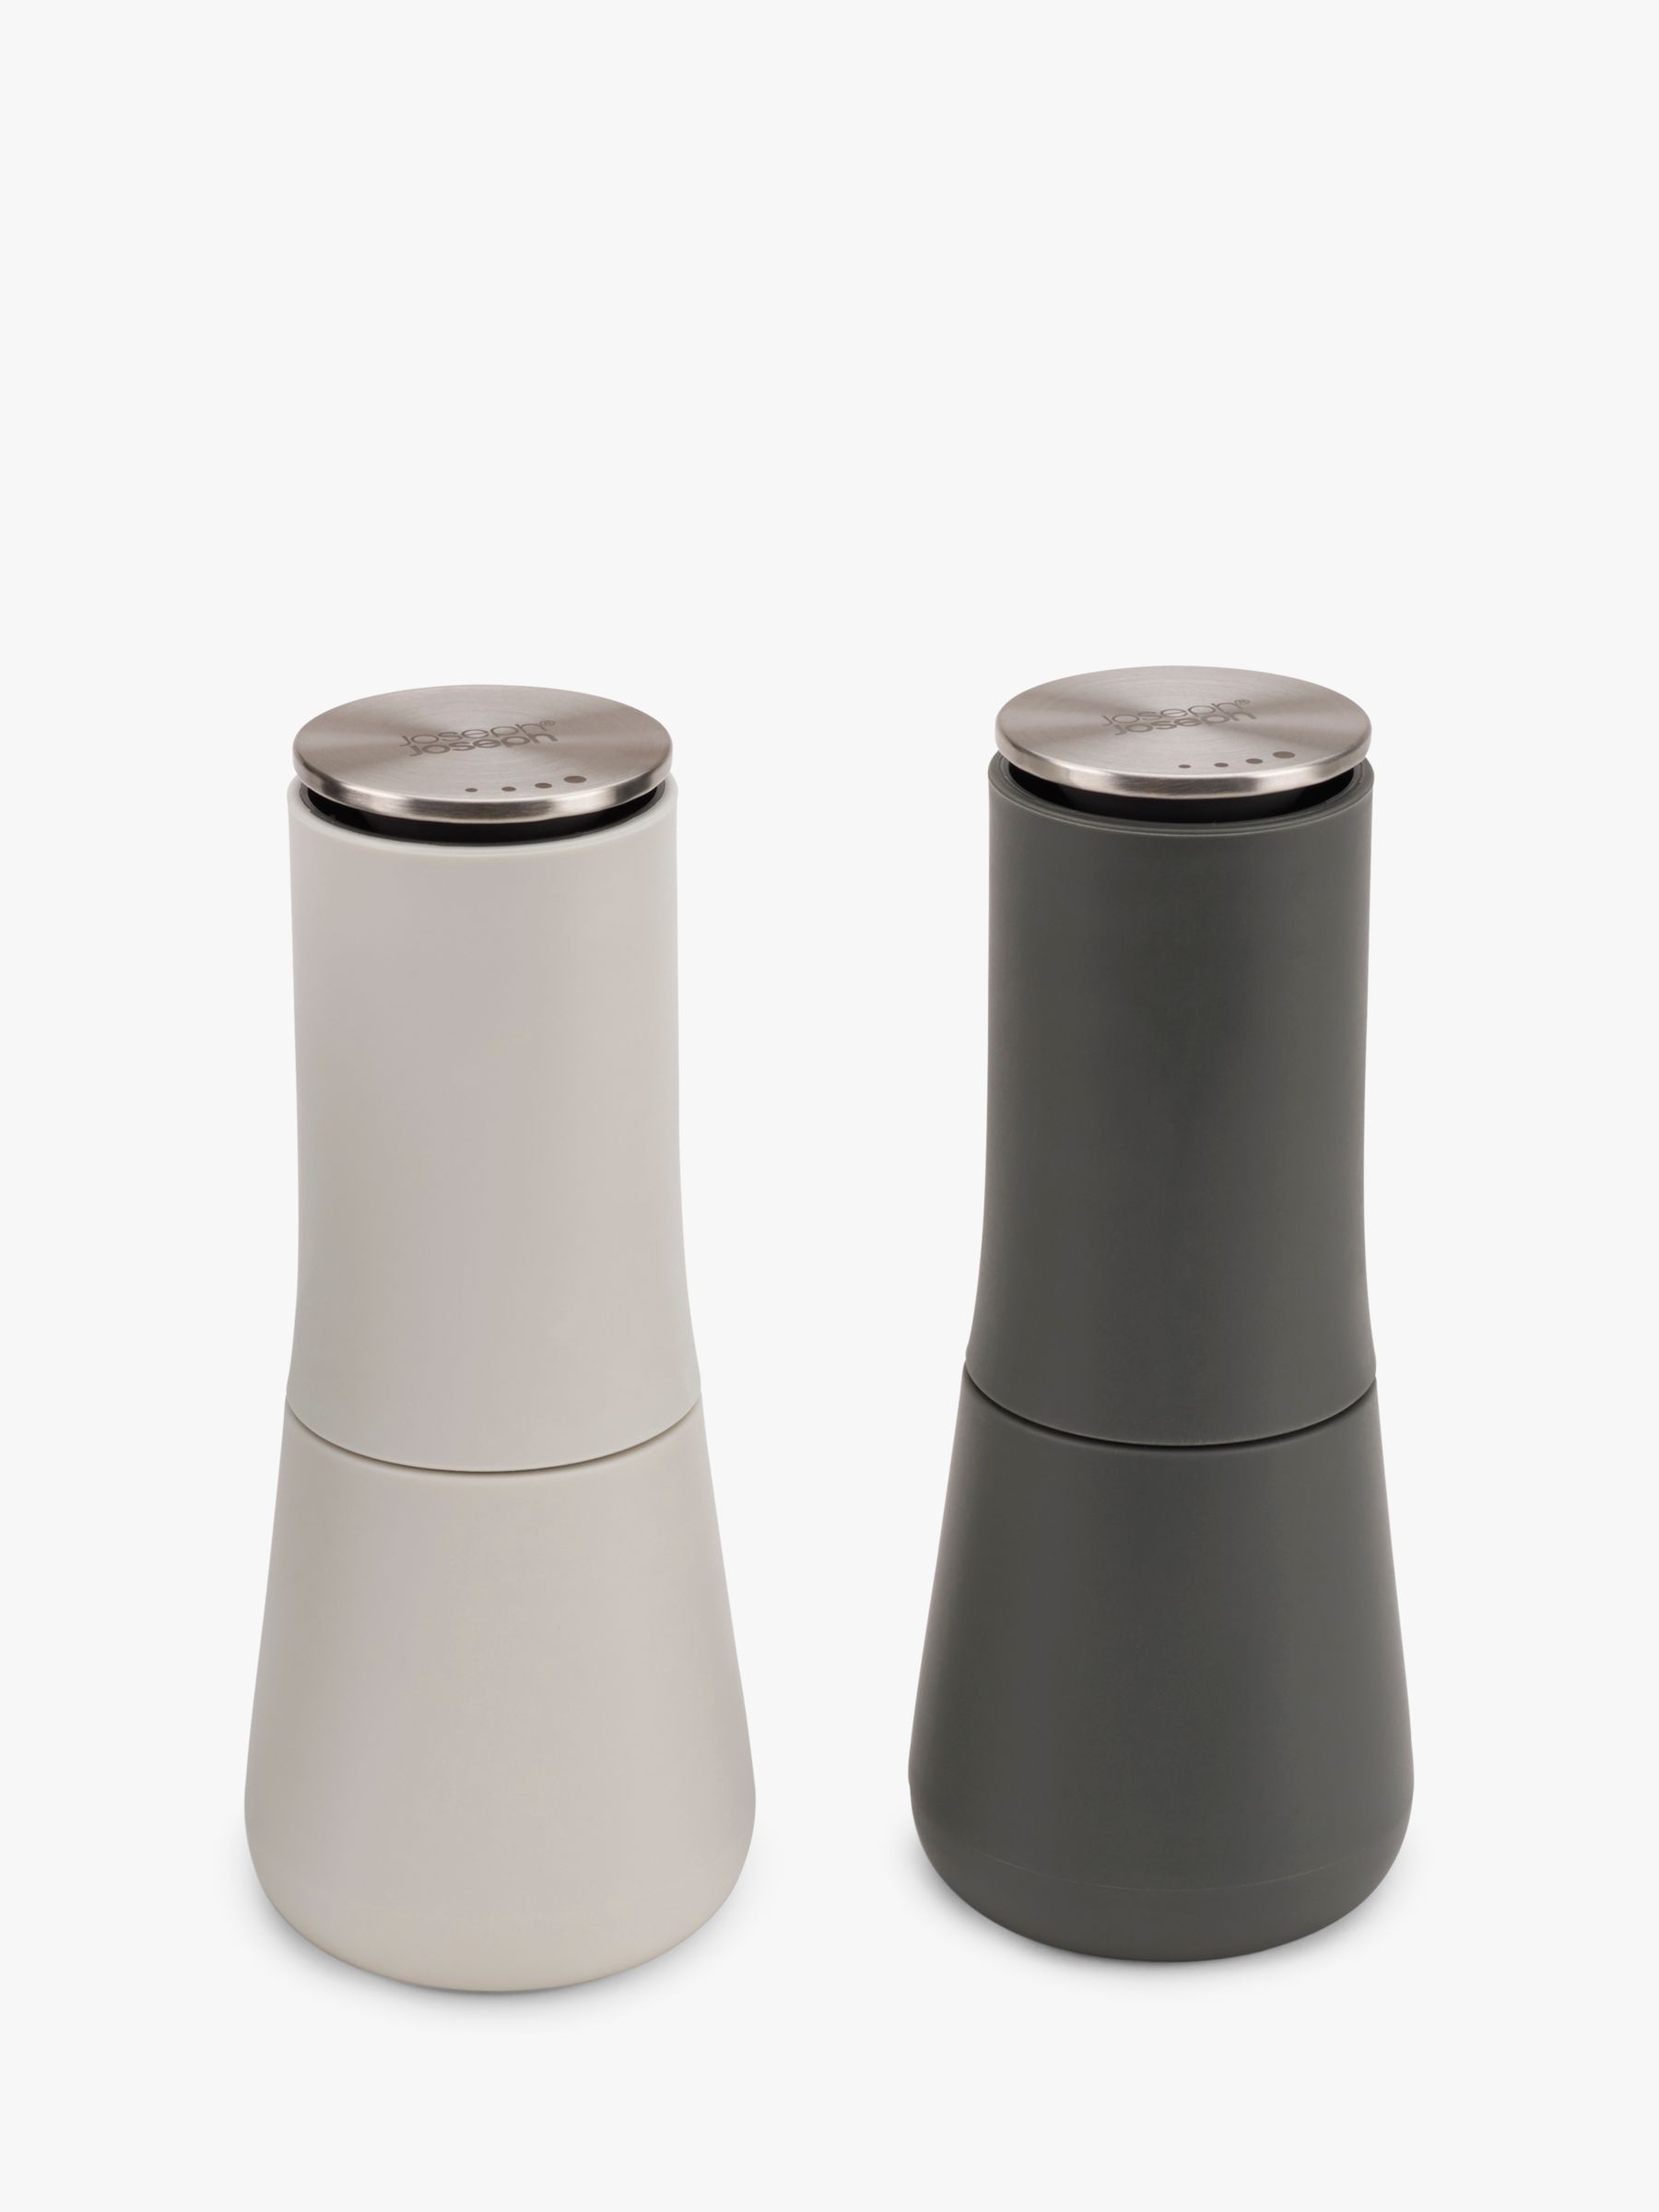 professional salt and pepper shakers